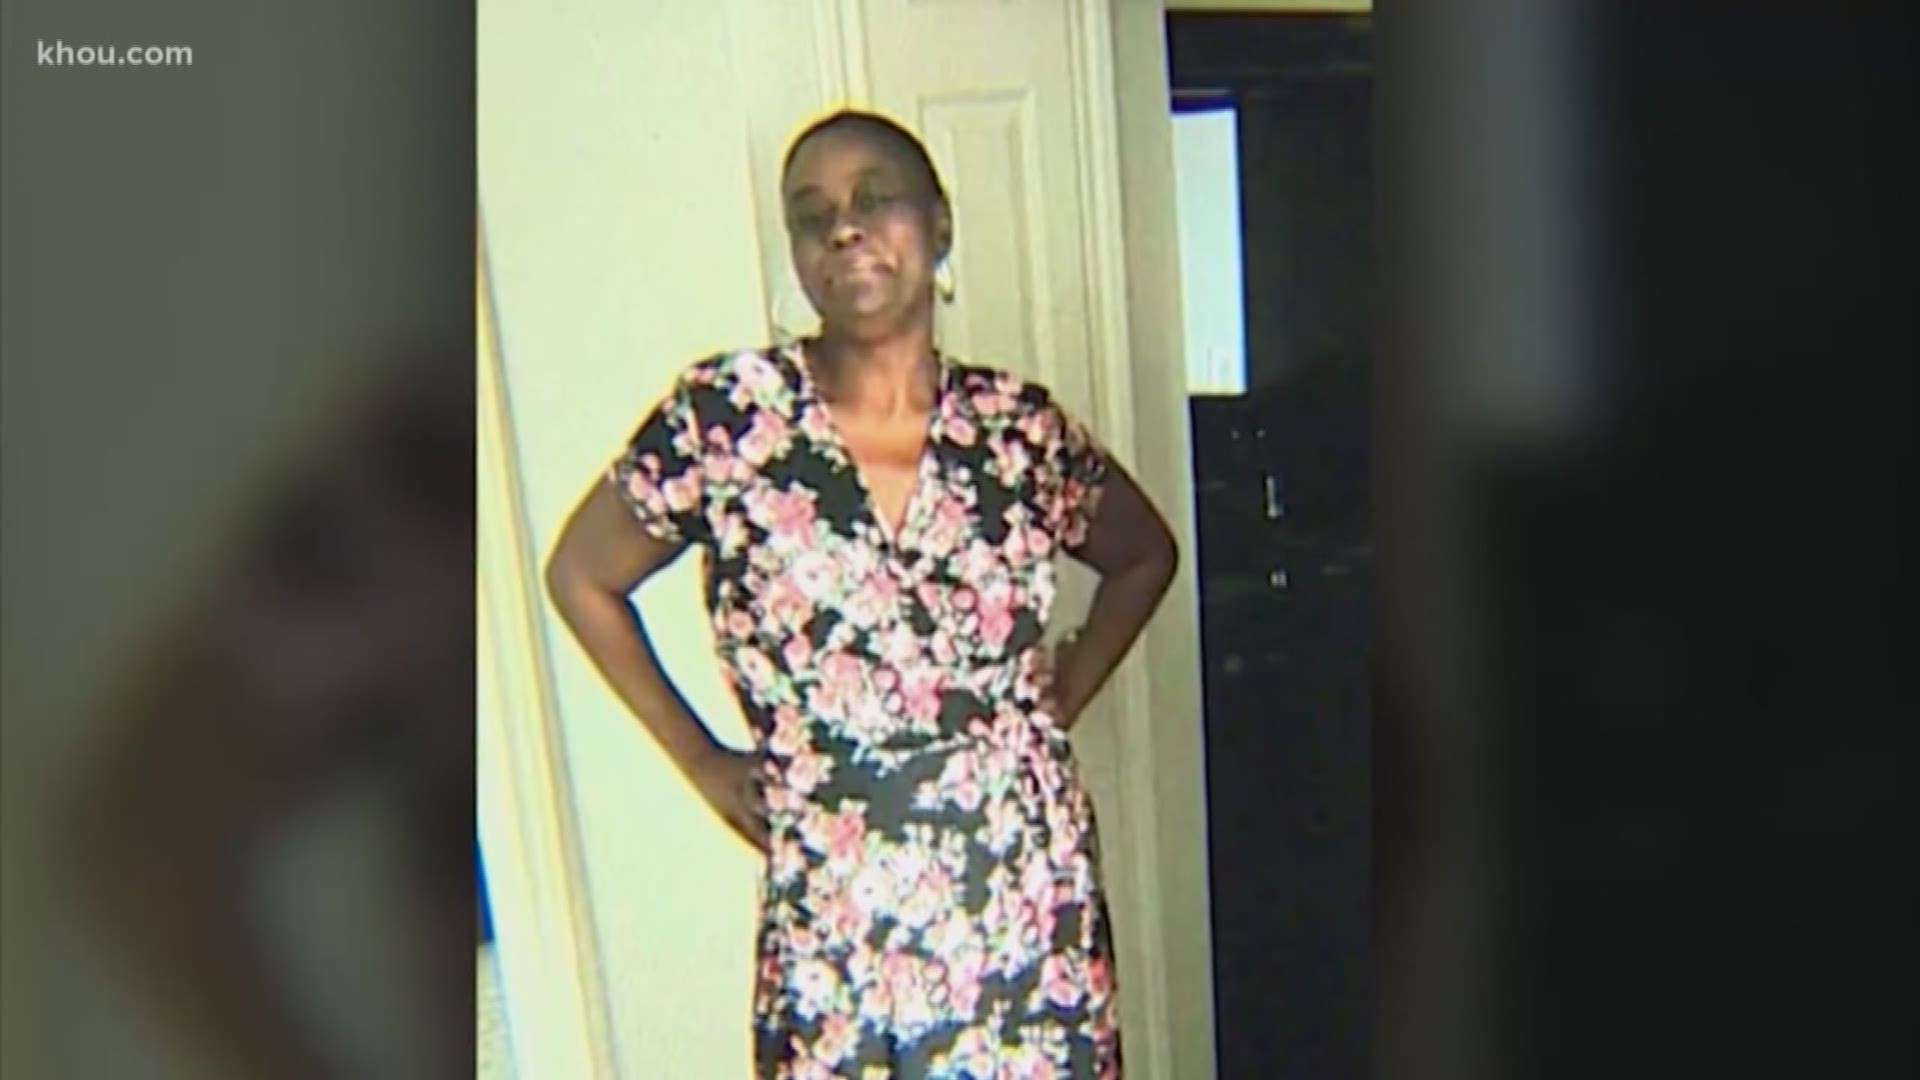 The woman shot and killed by a Baytown police officer will be laid to rest Thursday morning.